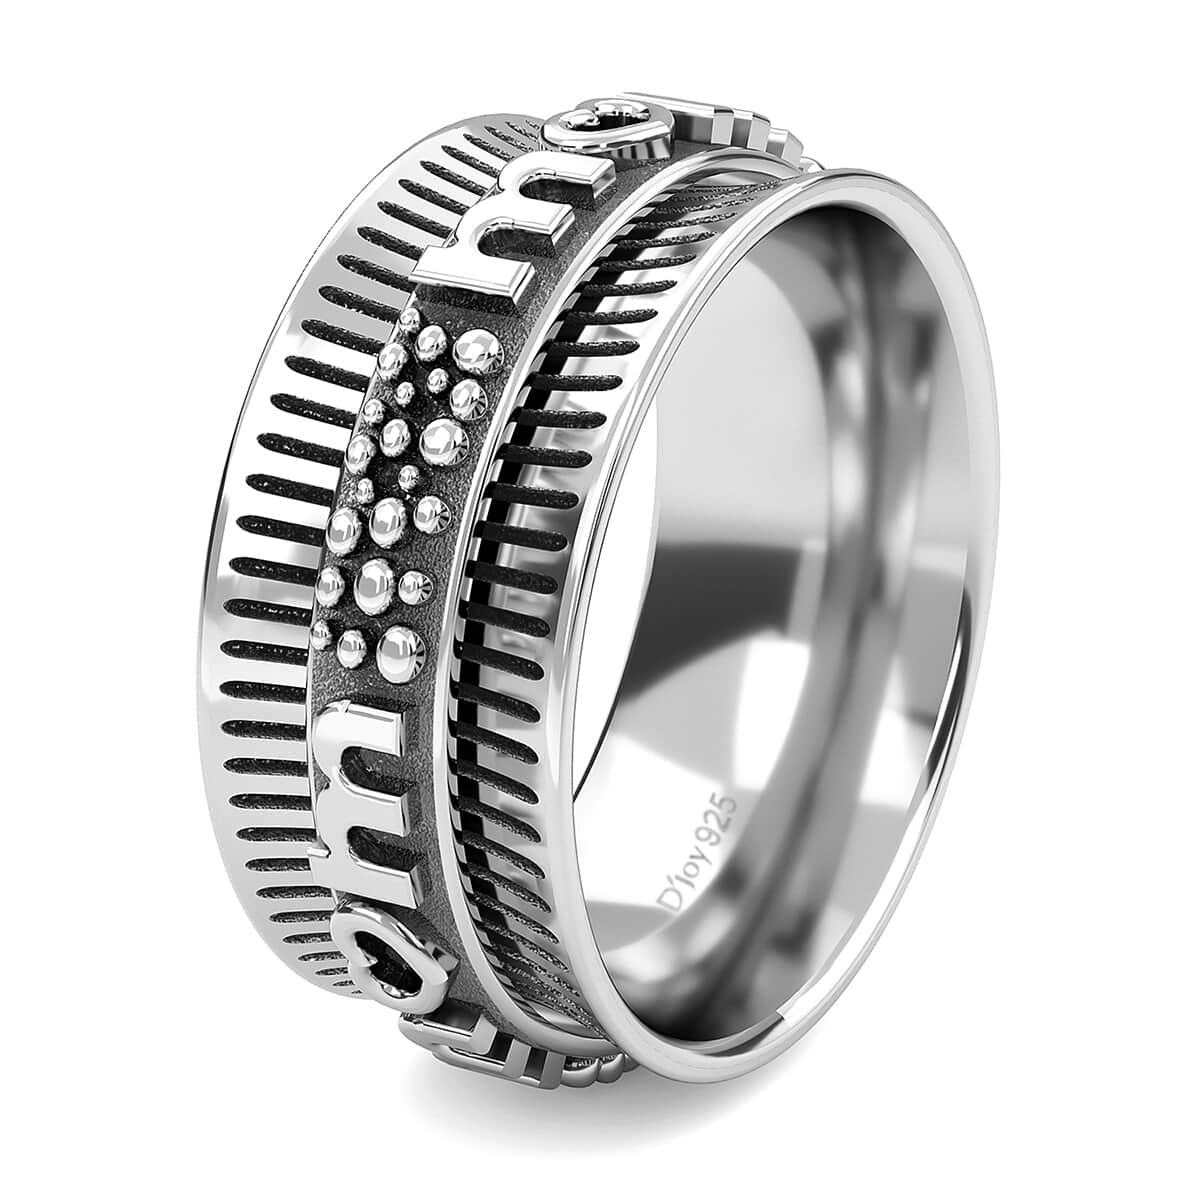 Sterling Silver Spinner Ring|Fidget Rings for Anxiety|Stress Relieving Anxiety Ring Band 5.60 grams (Size 5) image number 4